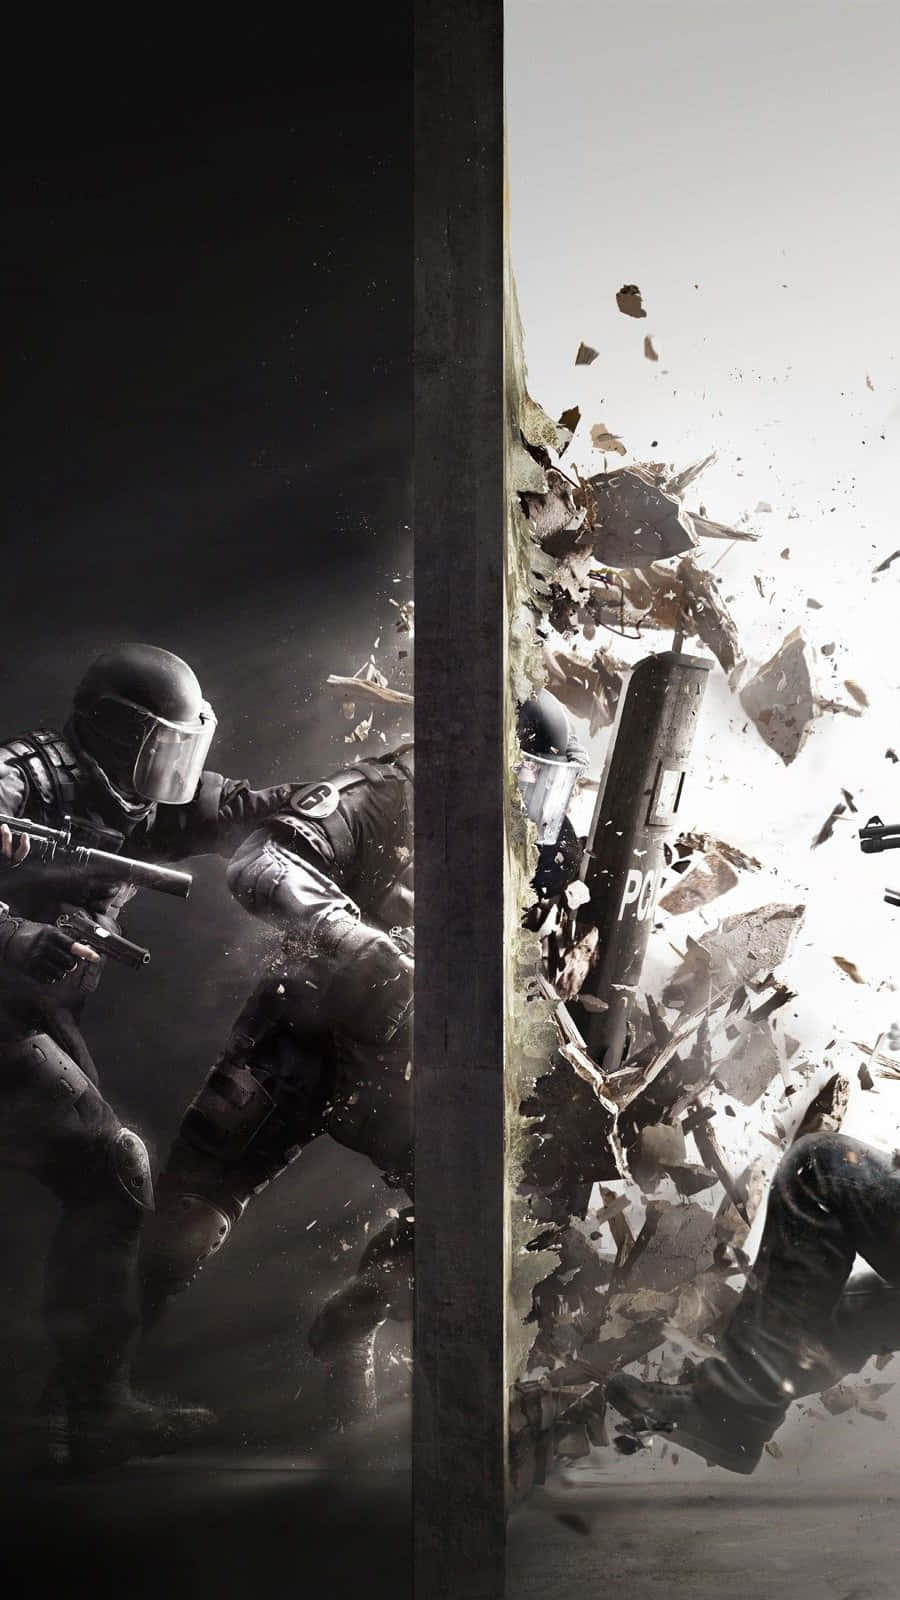 Get the incredible Android Rainbow Six Siege experience with top action graphics and intense gameplay.